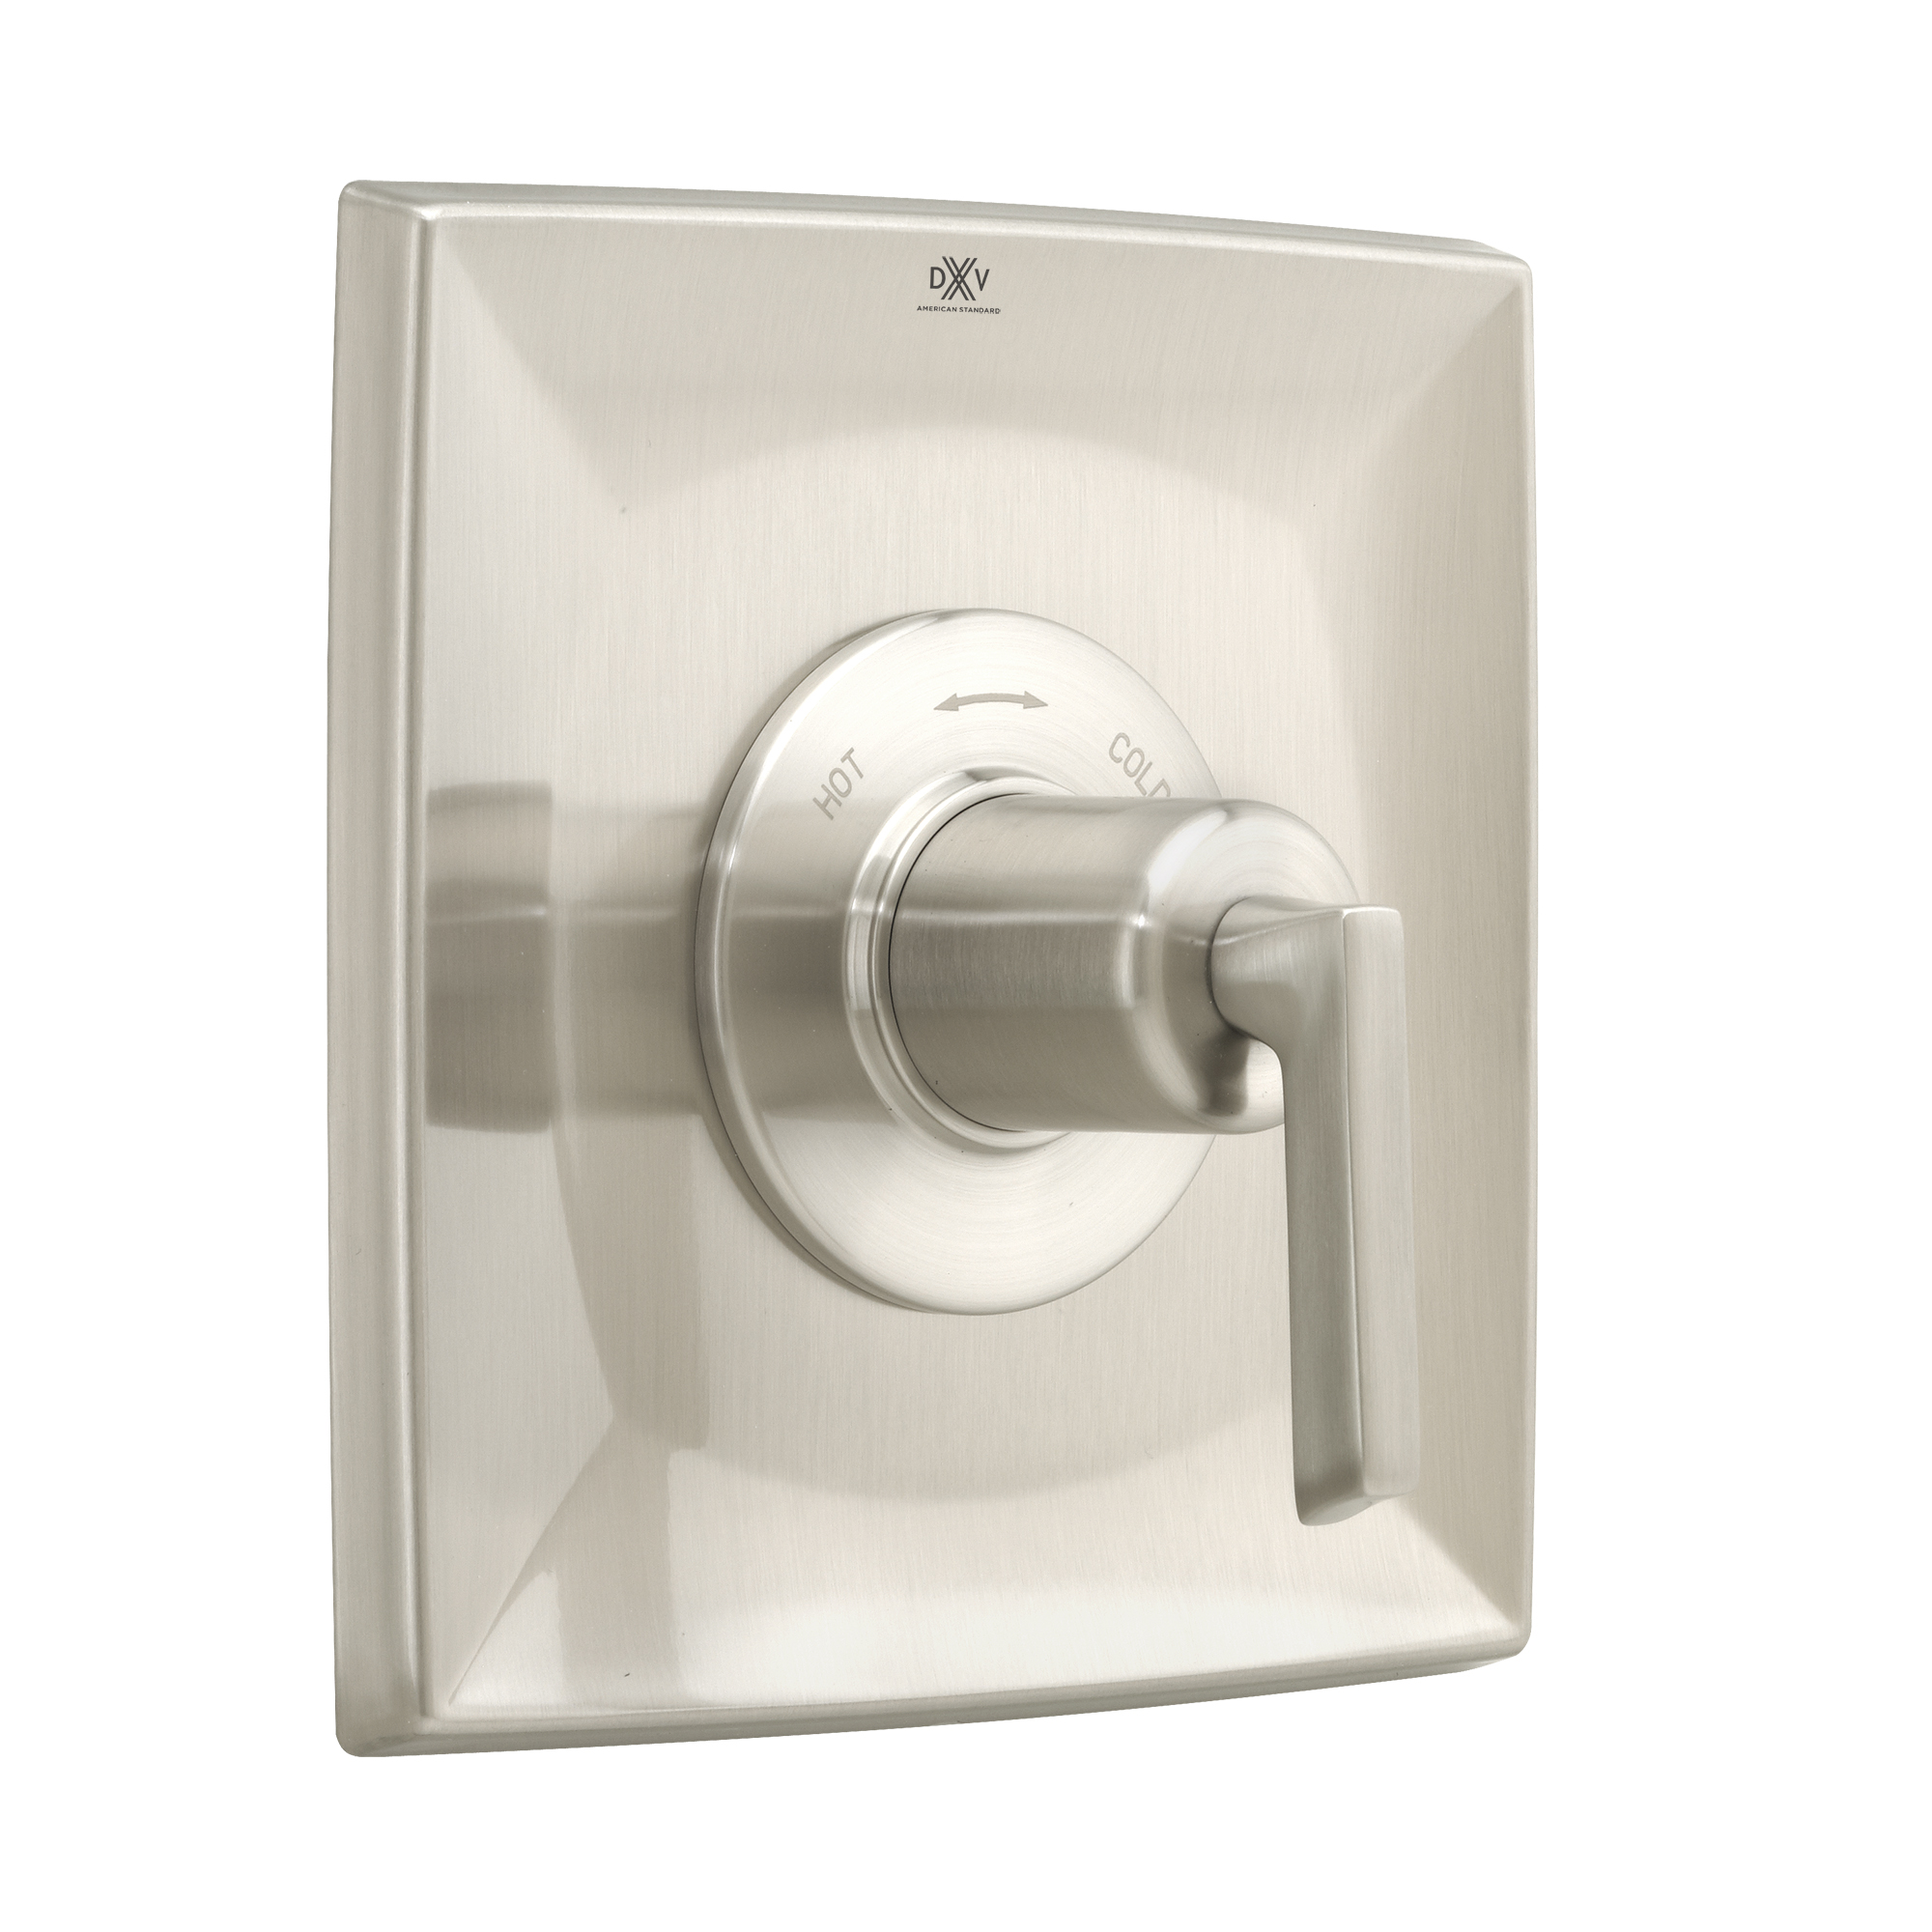 Keefe 1/2 Inch or 3/4 Inch Thermostatic Valve Trim